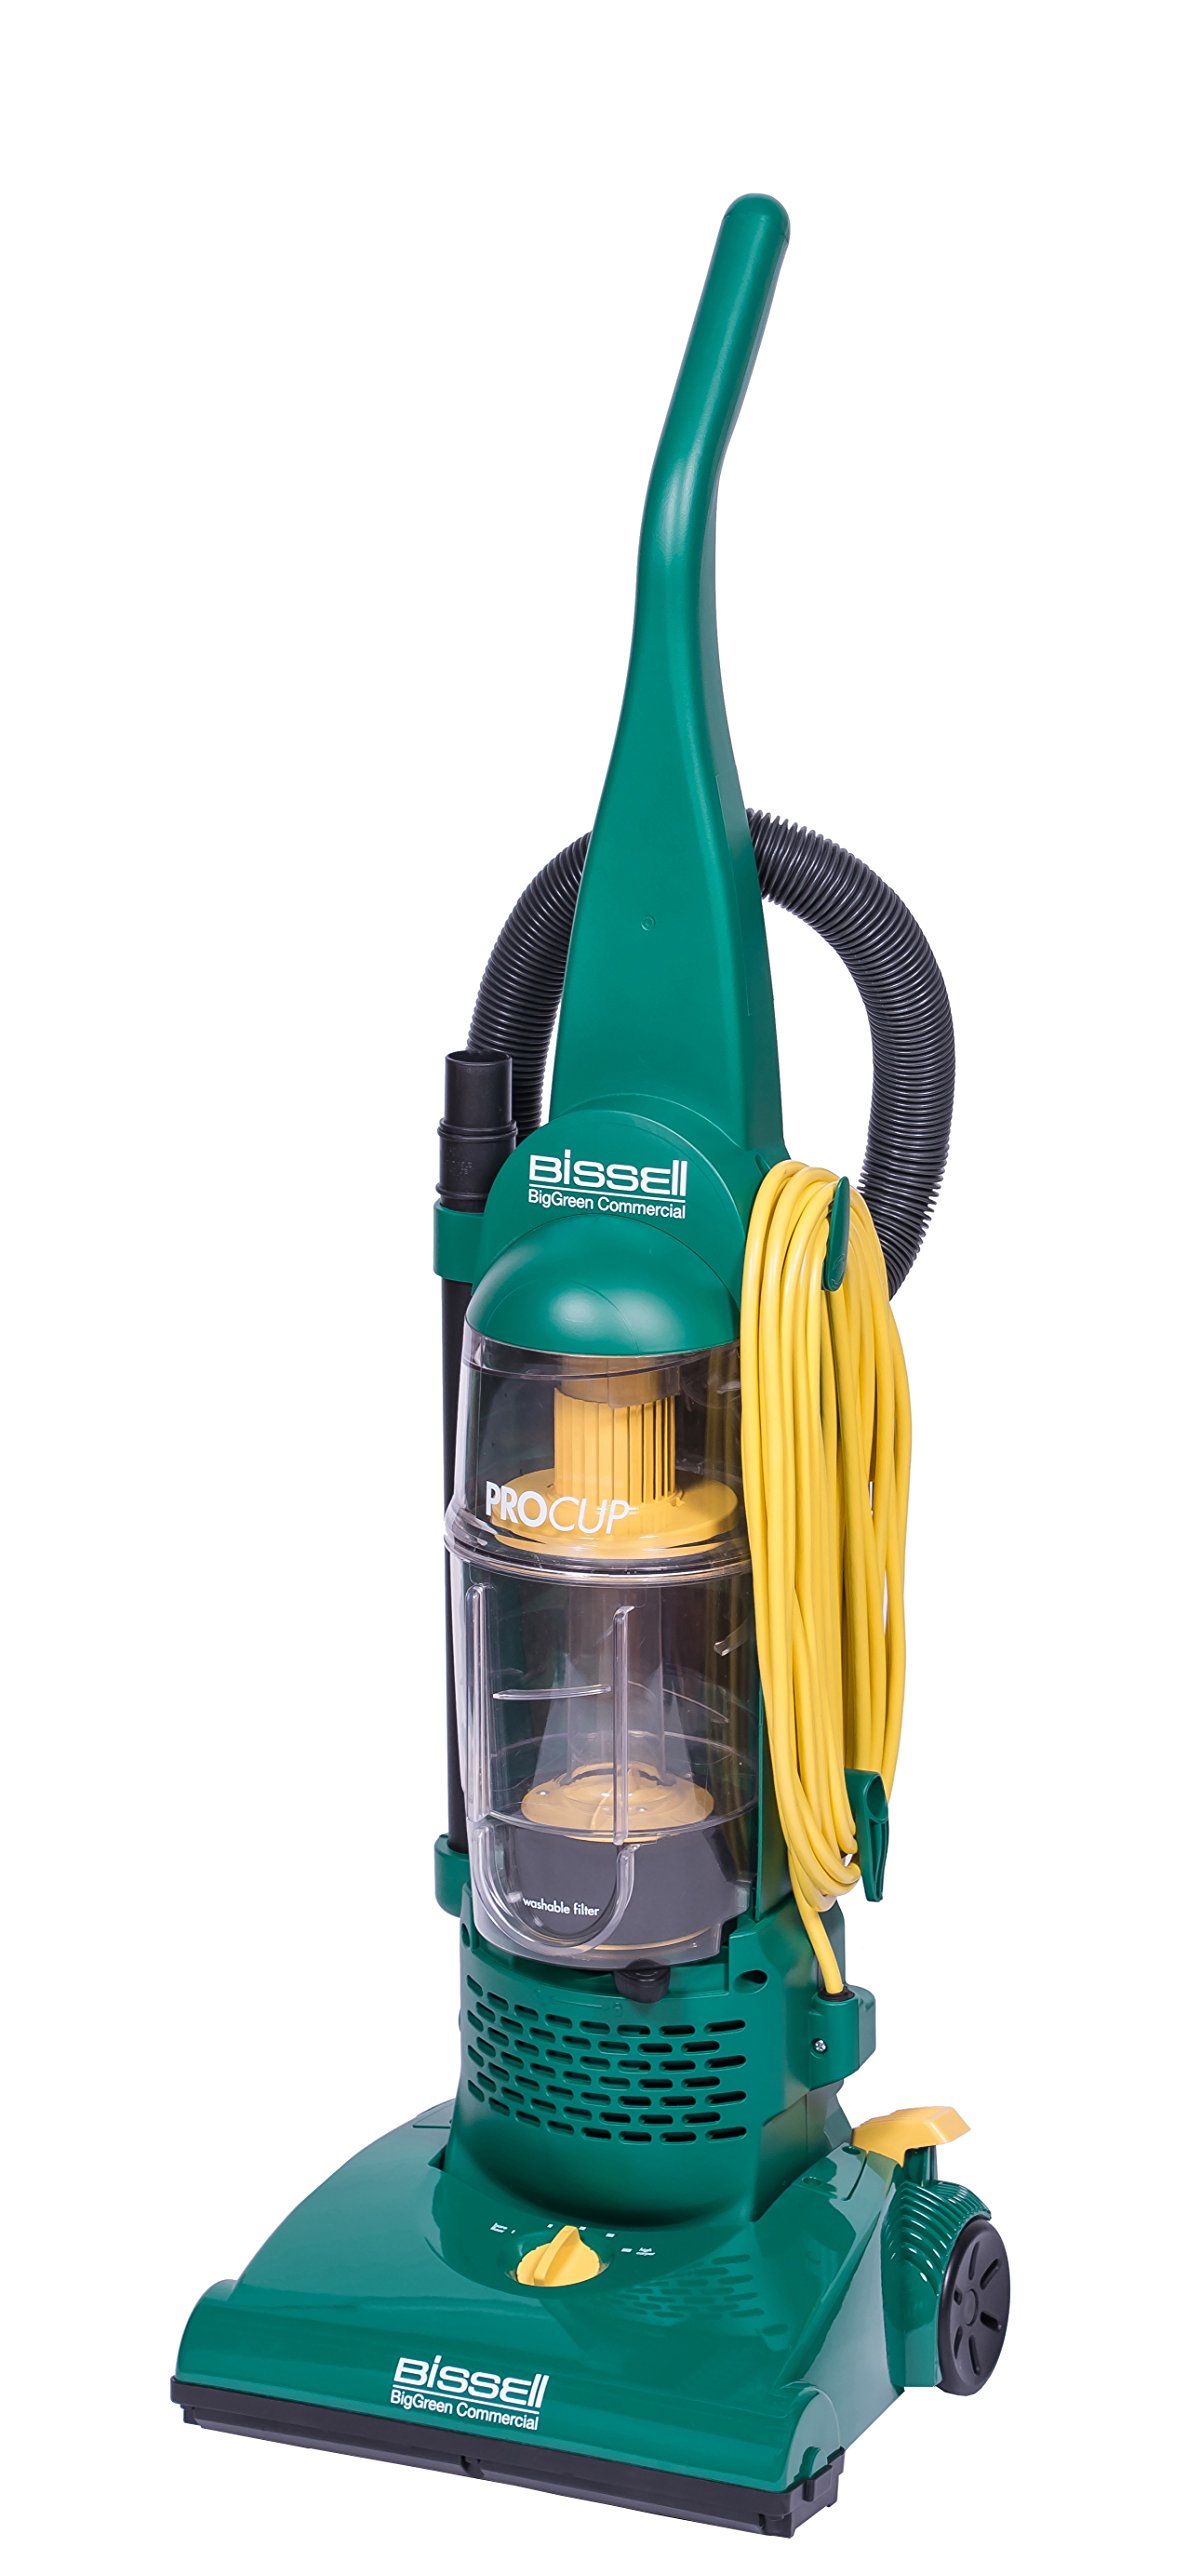 Bissell Commercial Pro Upright Dirt Cup Vacuum